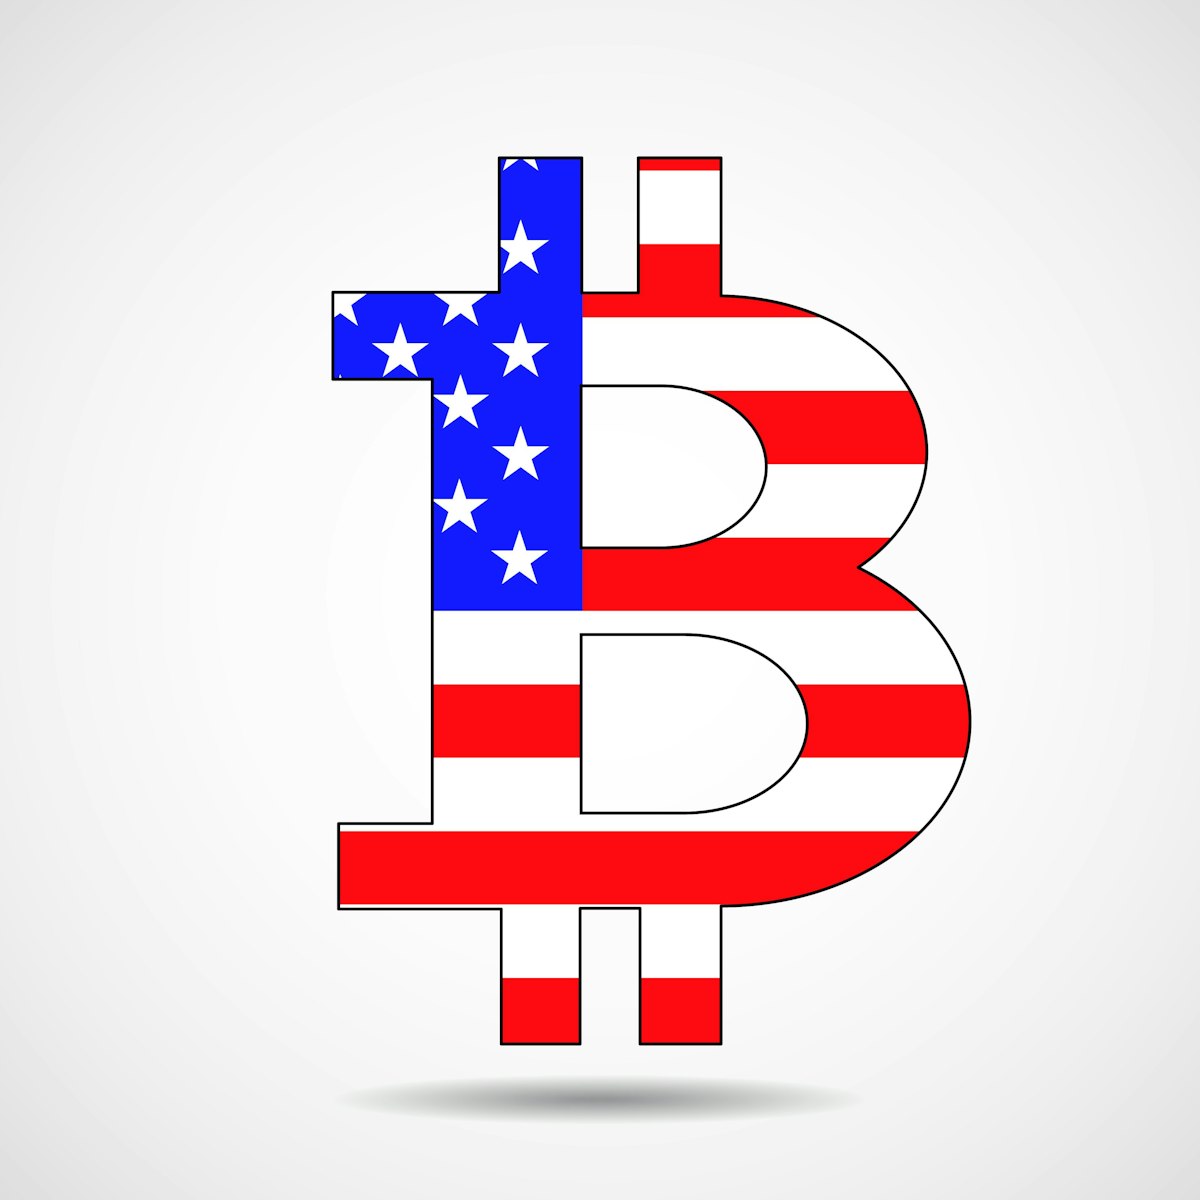 featured image - While The Results Are Not In, Bitcoin is The Winner in the U.S. Presidential Election 2020